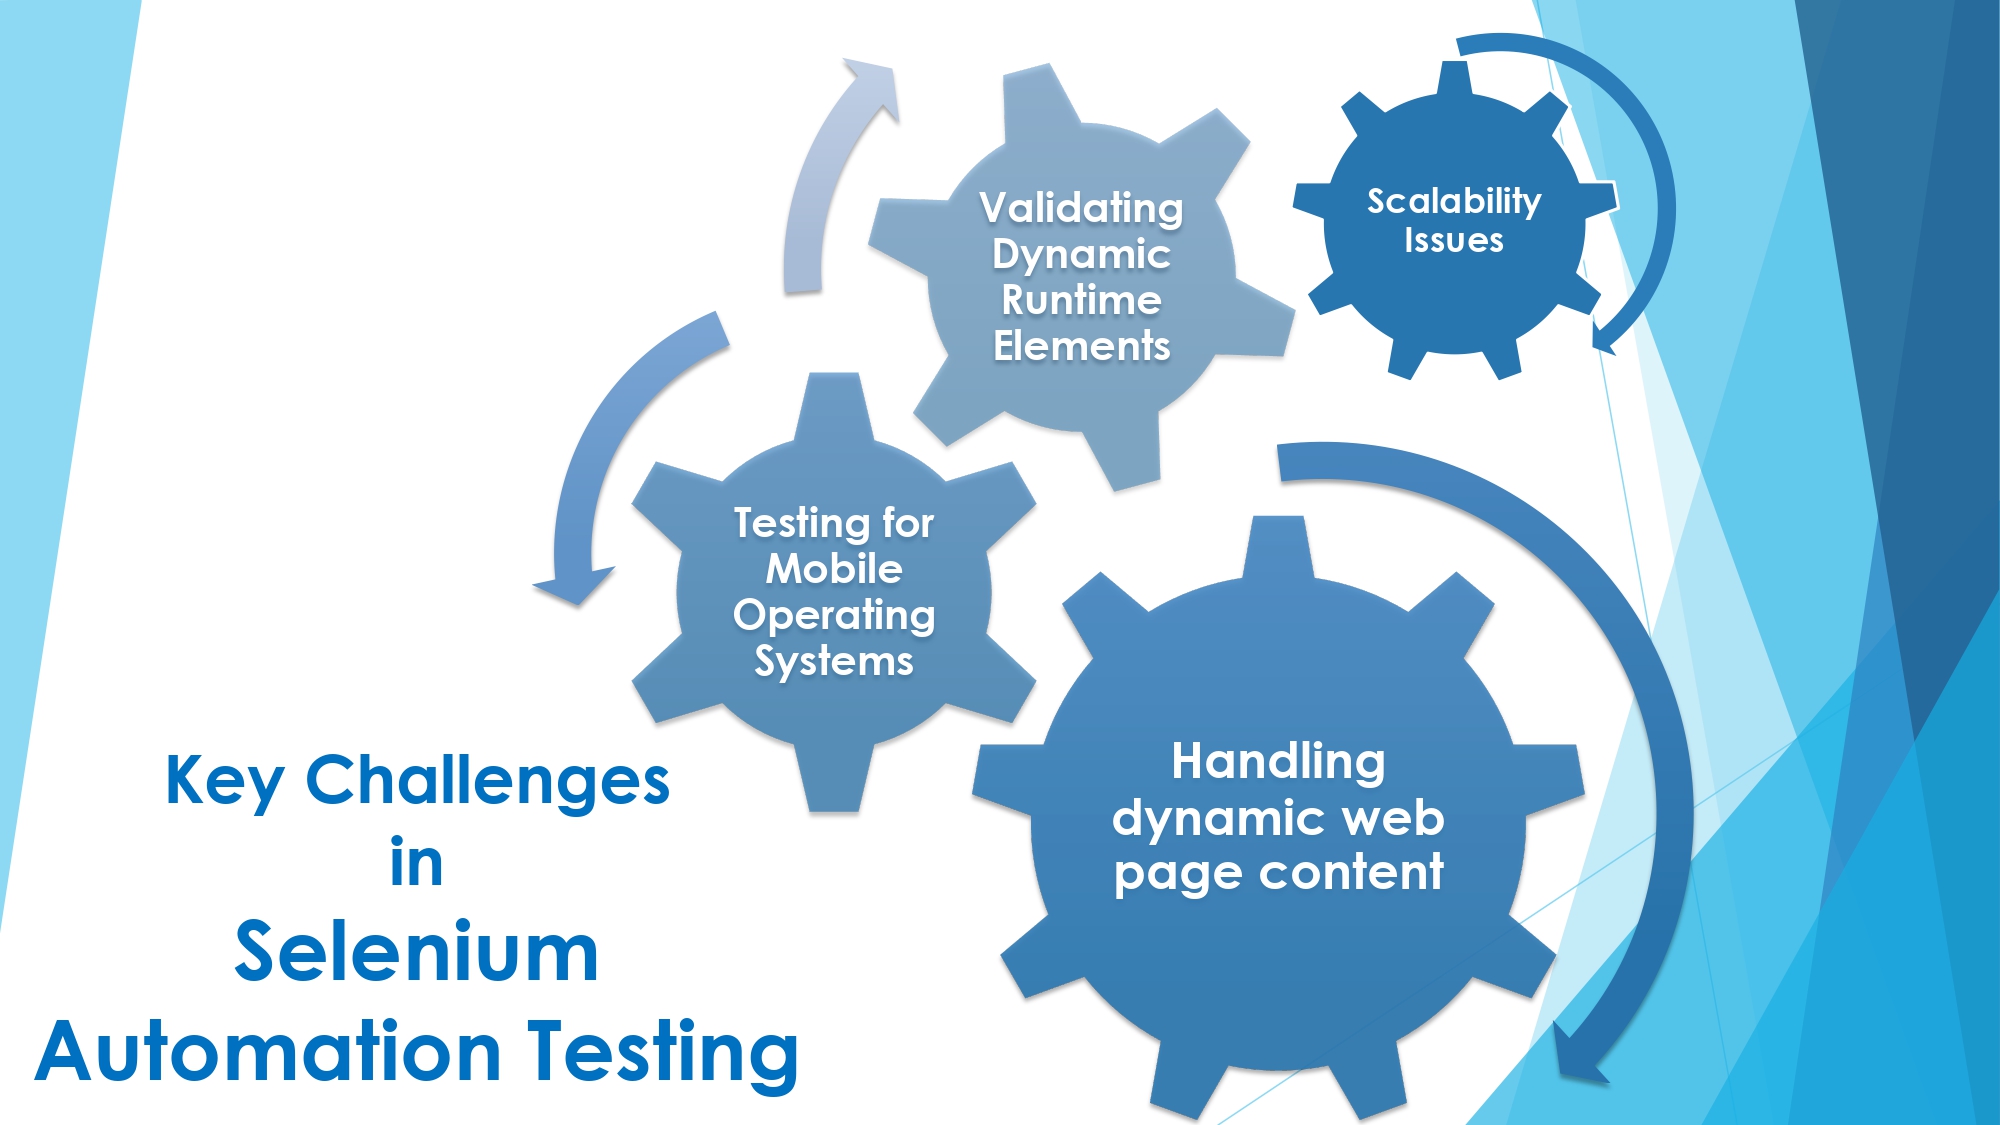 Key Challenges in Selenium Automation Testing